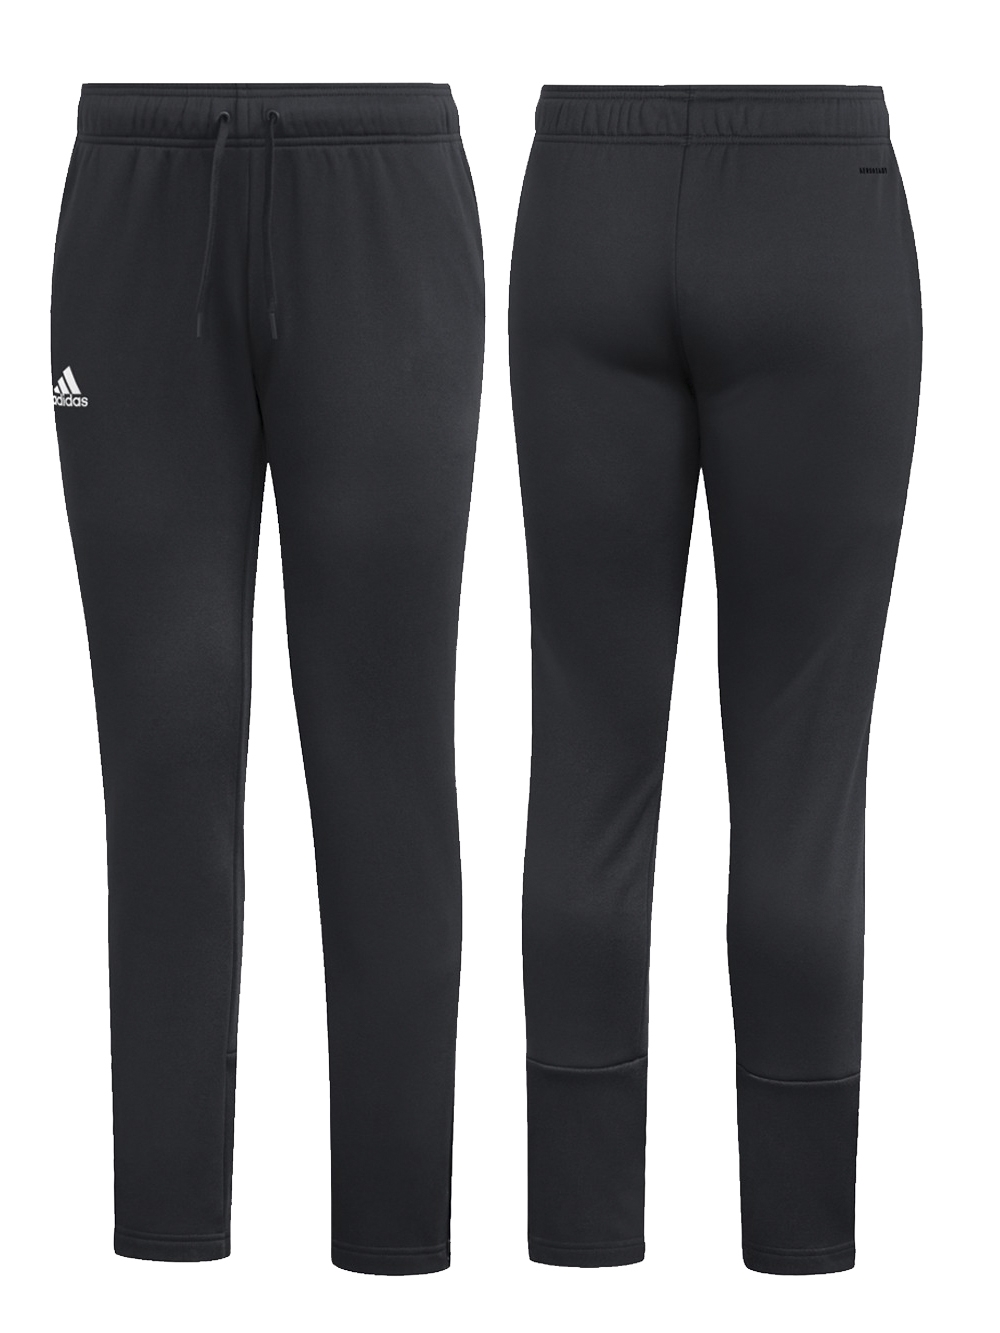 Adidas Women's Team Issue Pant